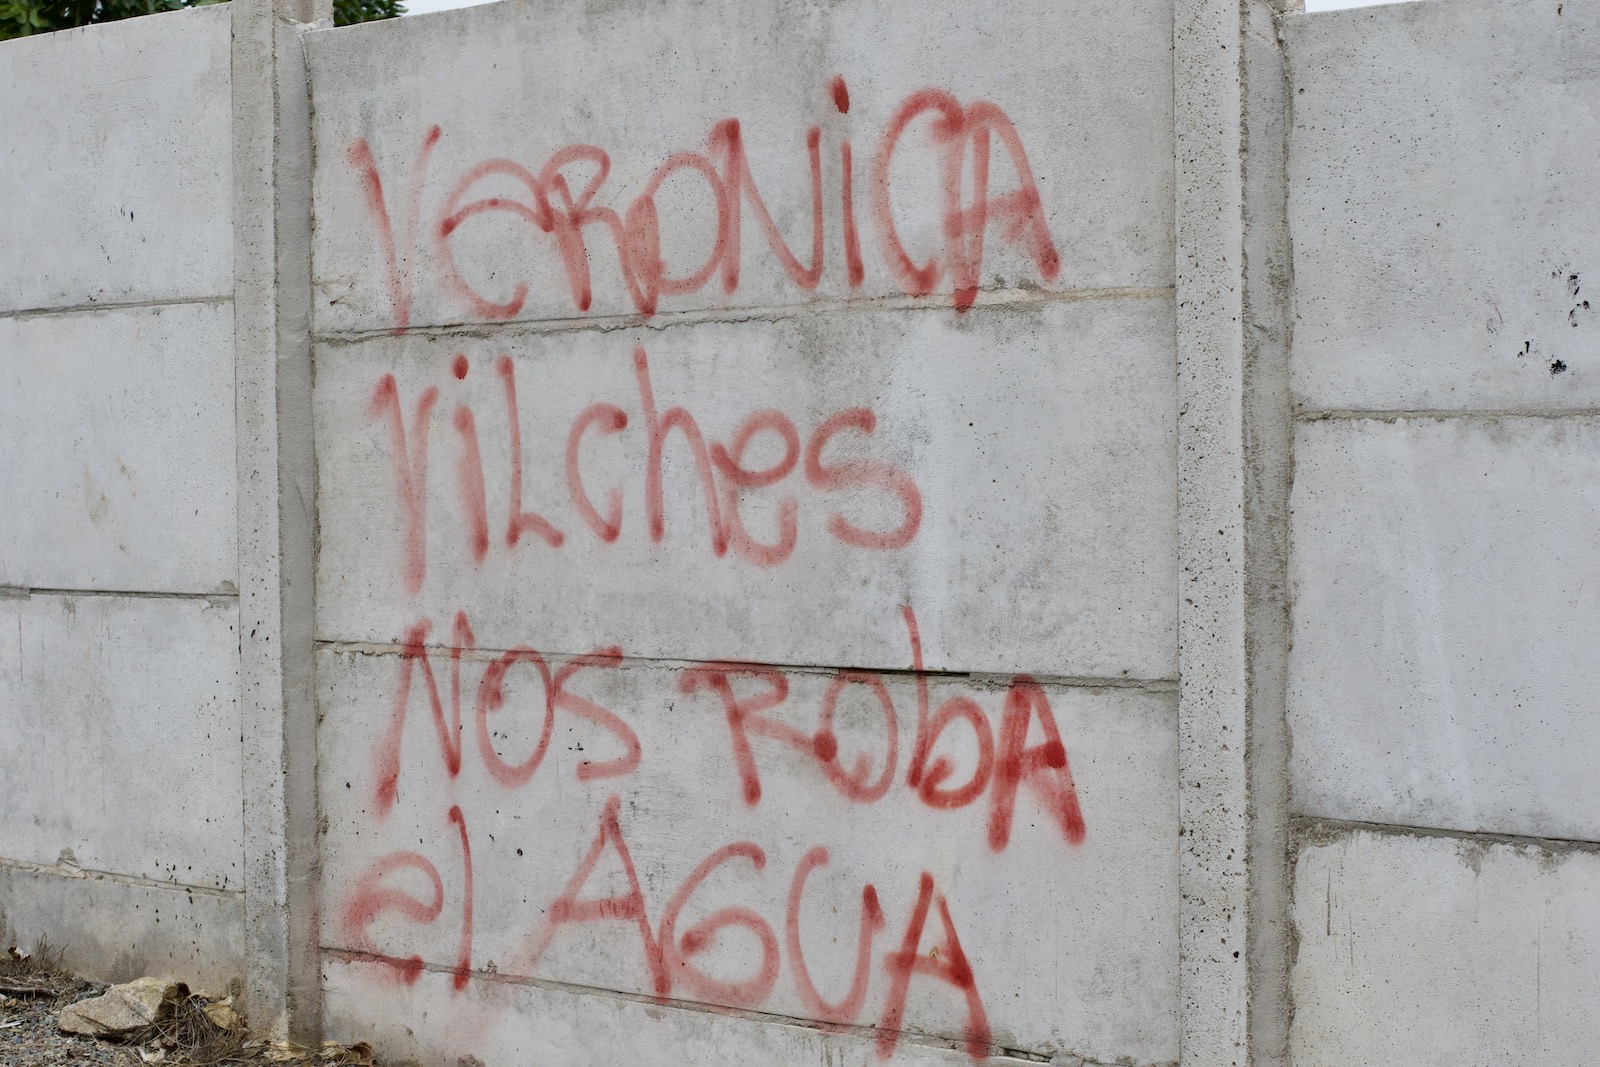 Mural saying "Veronica Vilches steals our water" in Spanish